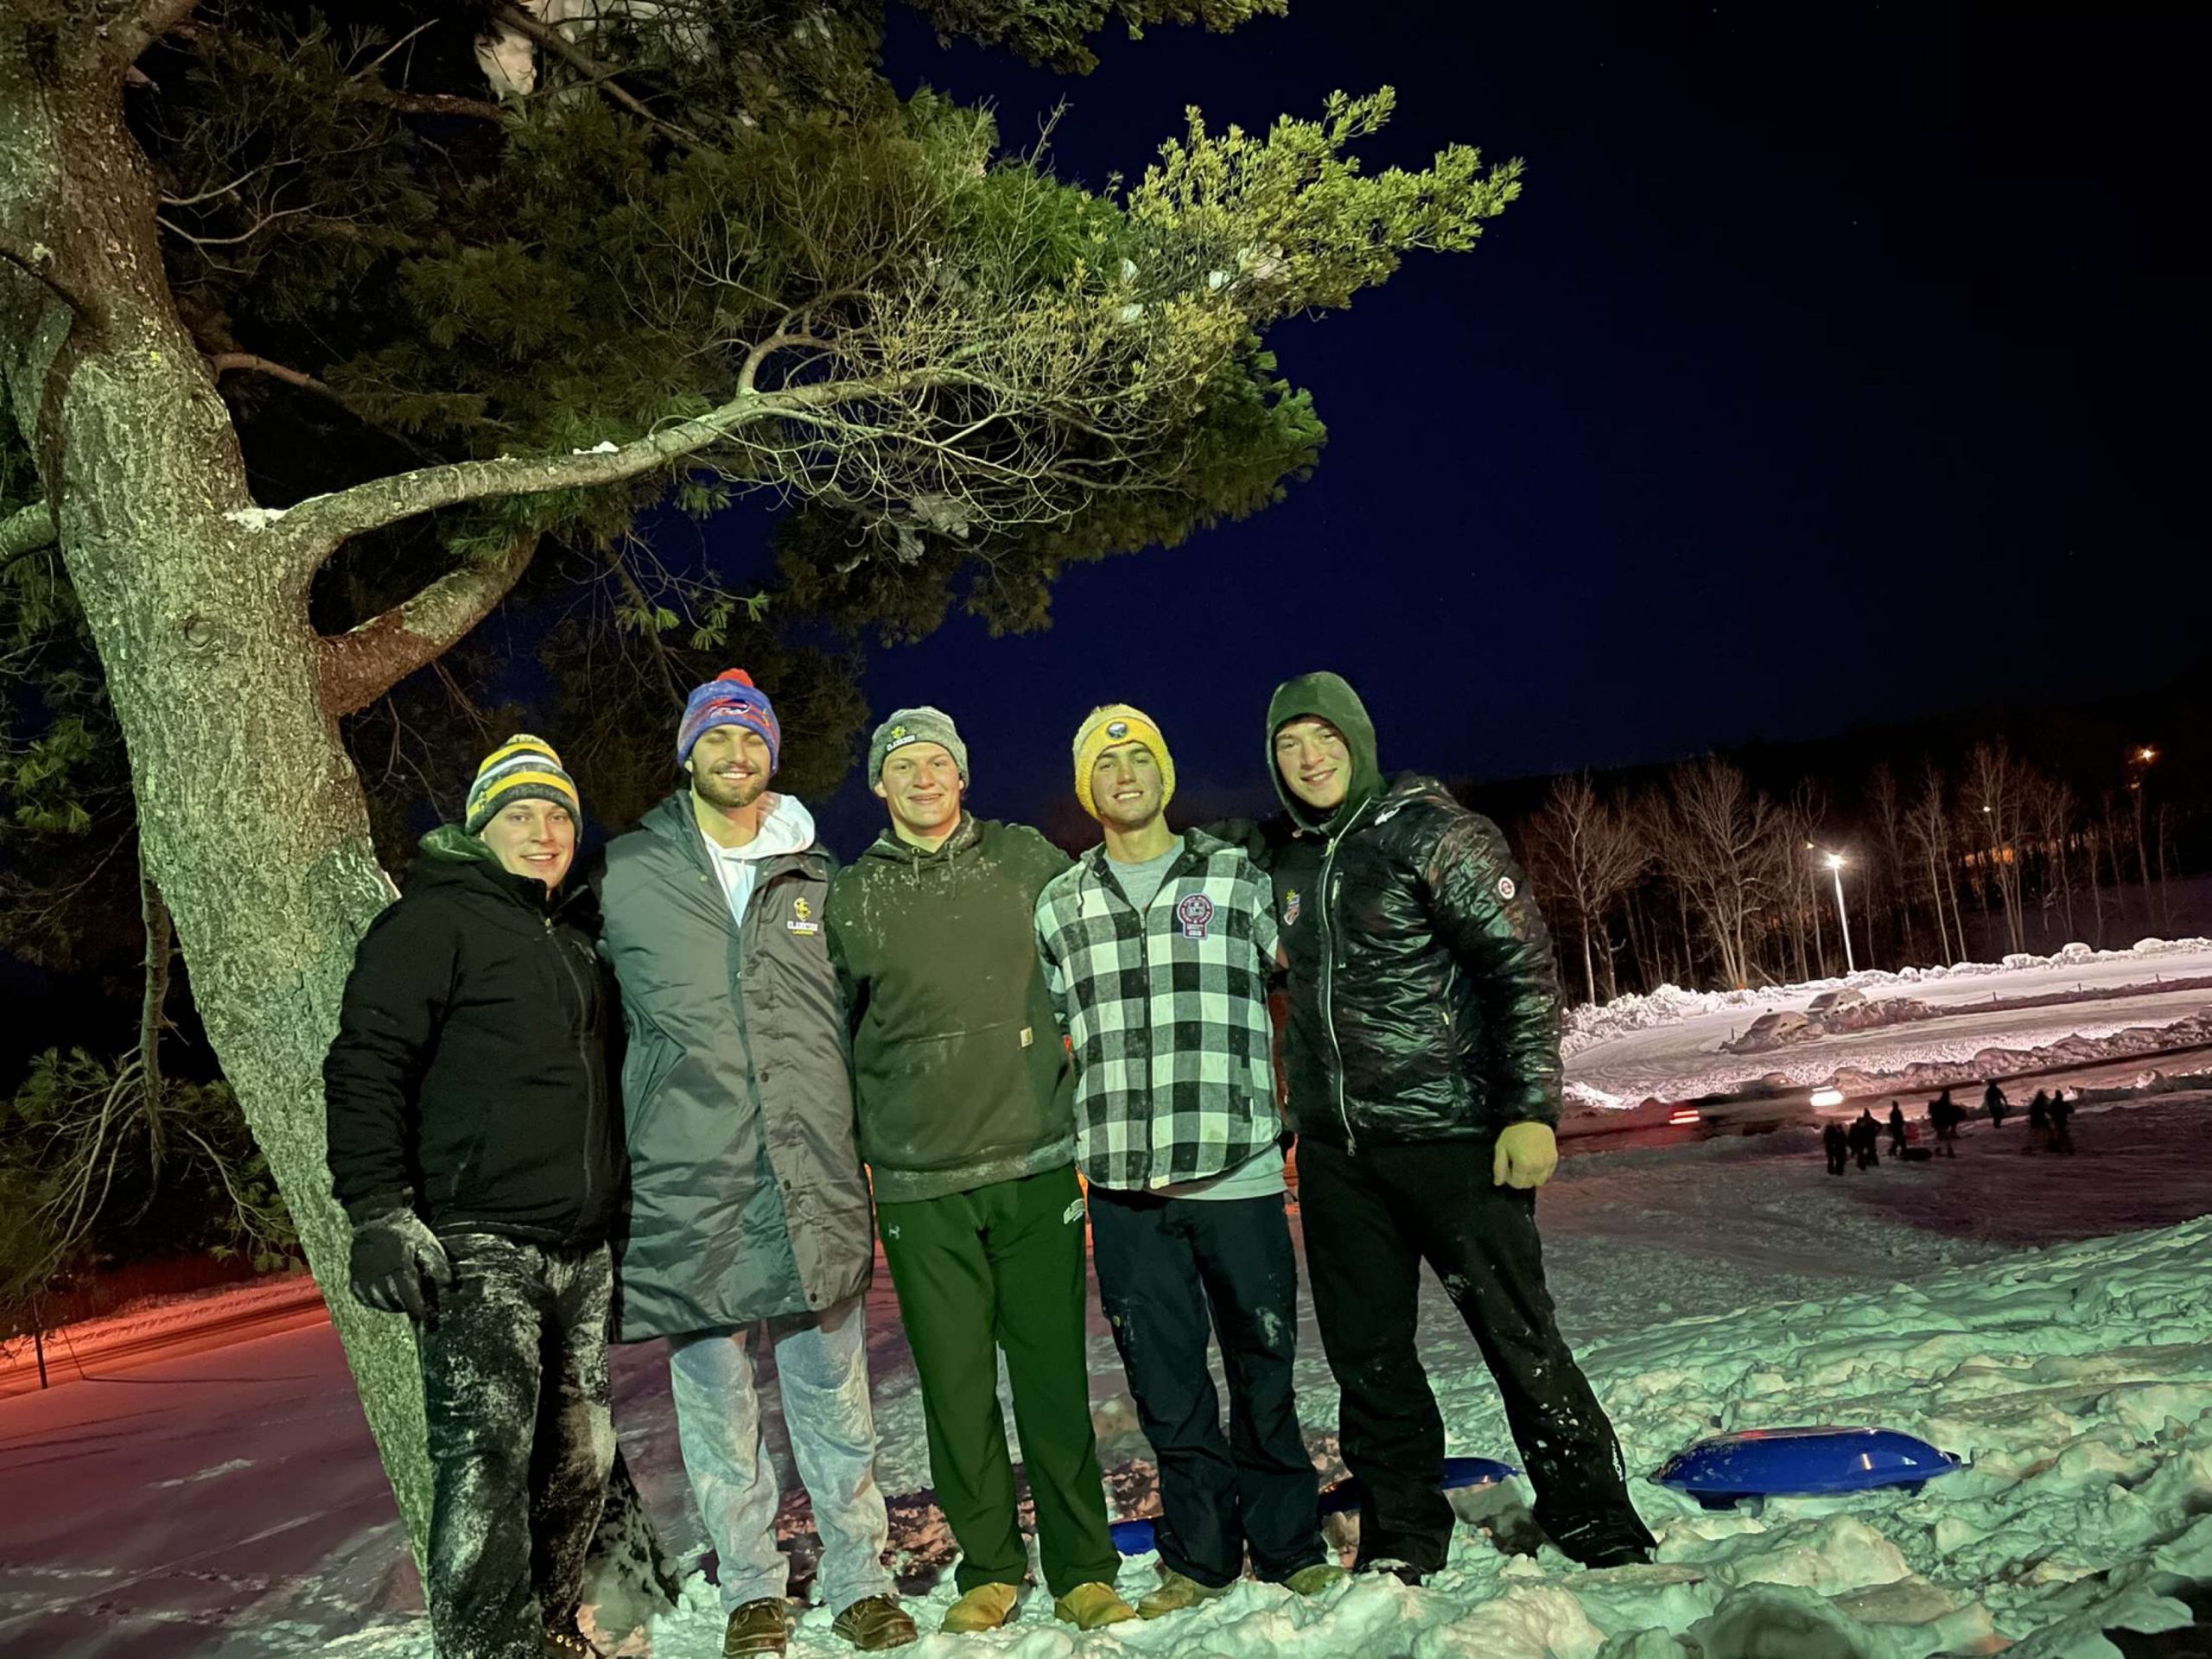 Five students pose outside at night.